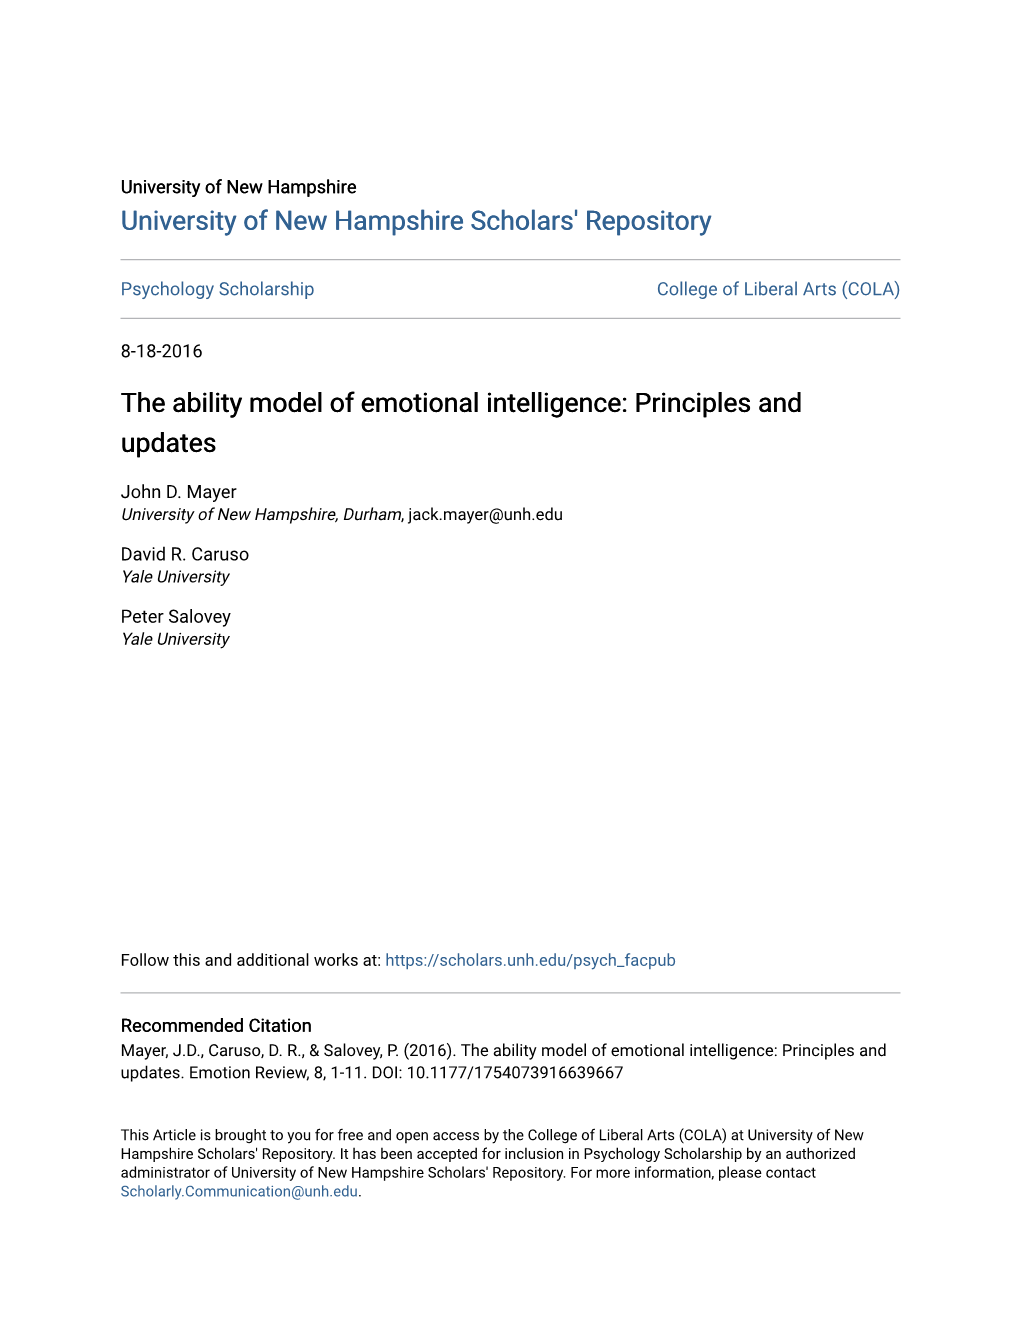 The Ability Model of Emotional Intelligence: Principles and Updates